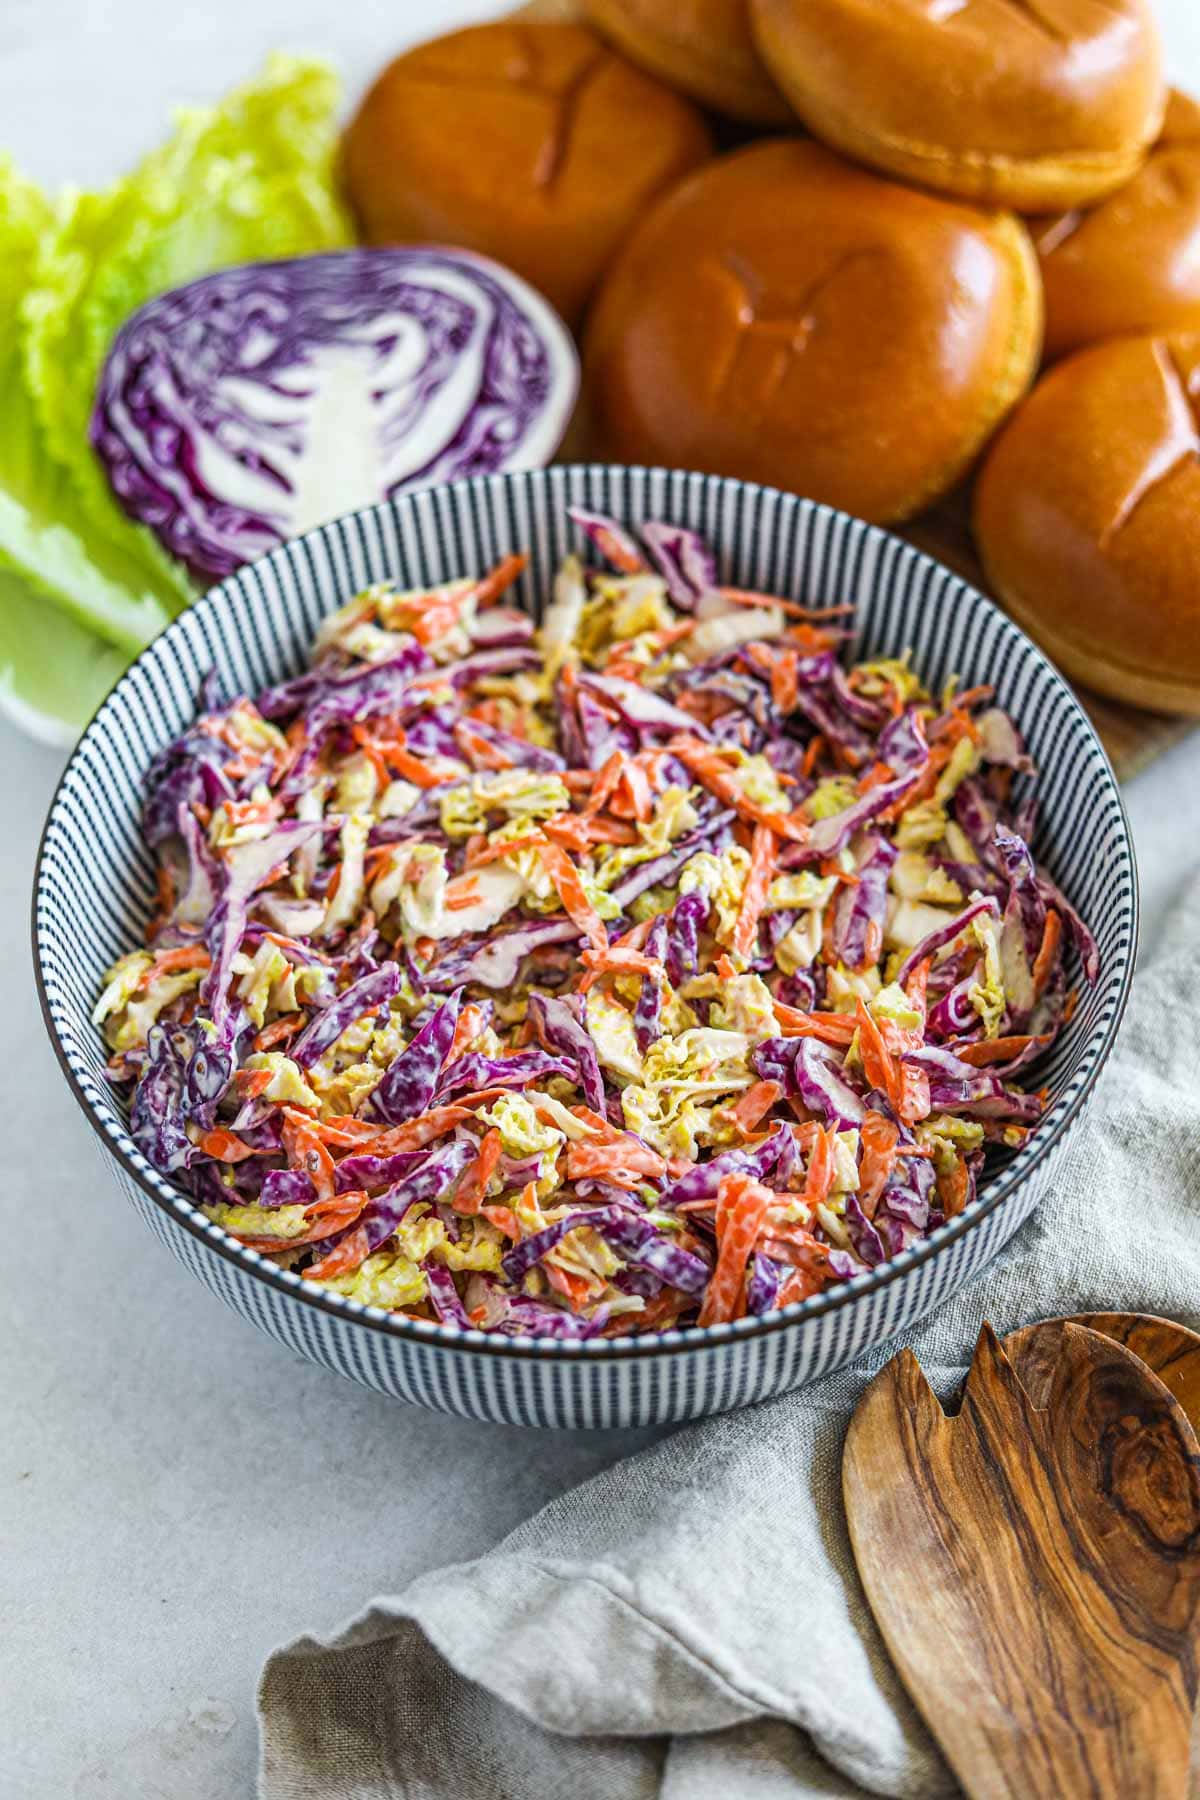 Healthy Greek Yogurt Coleslaw recipe (with Napa and Red Cabbage) in a striped Japanese bowl.